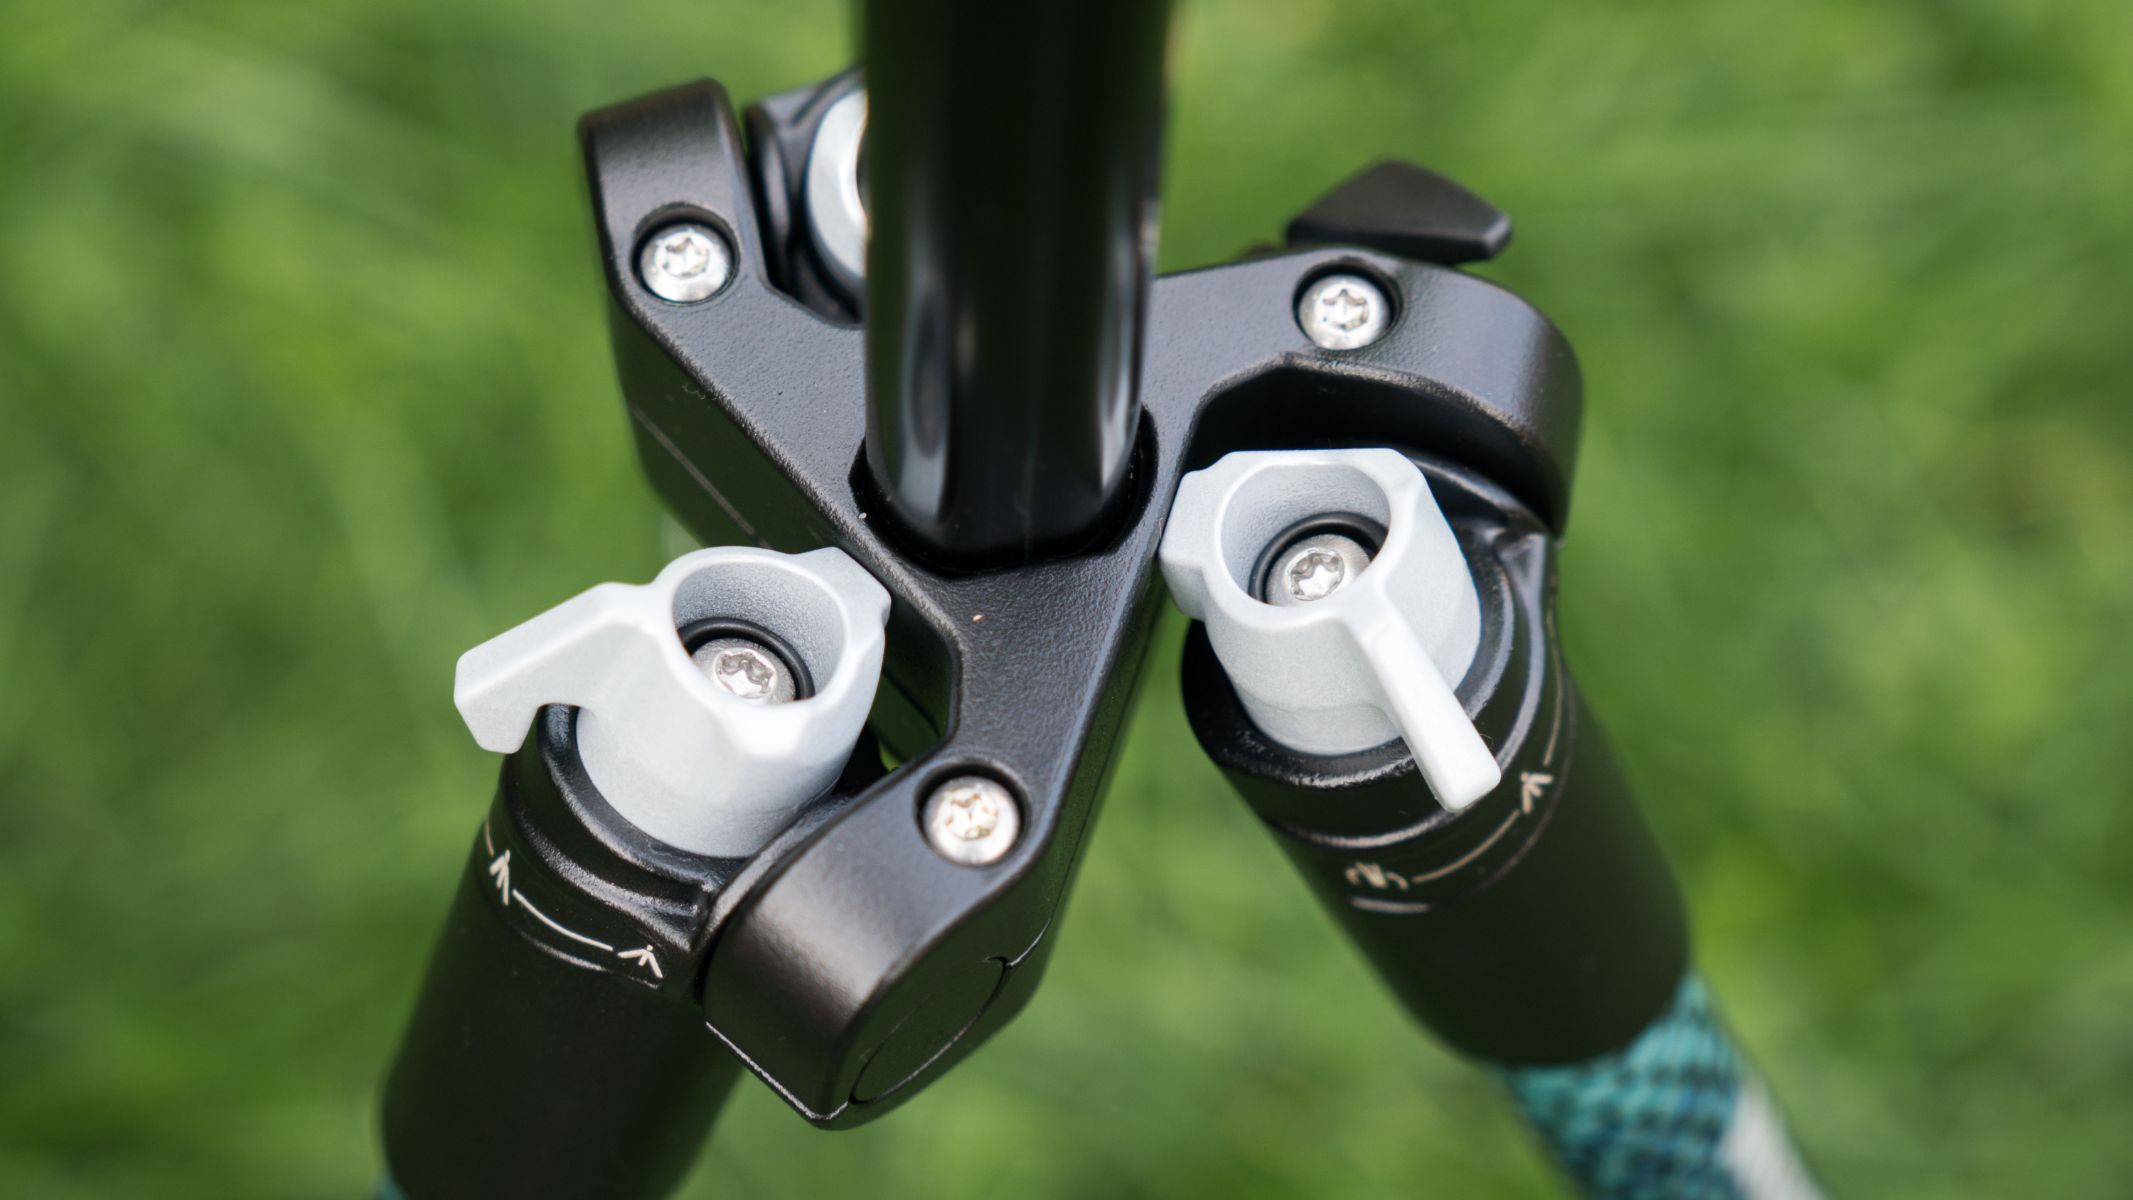 A close view of the locking levers on the tripod legs